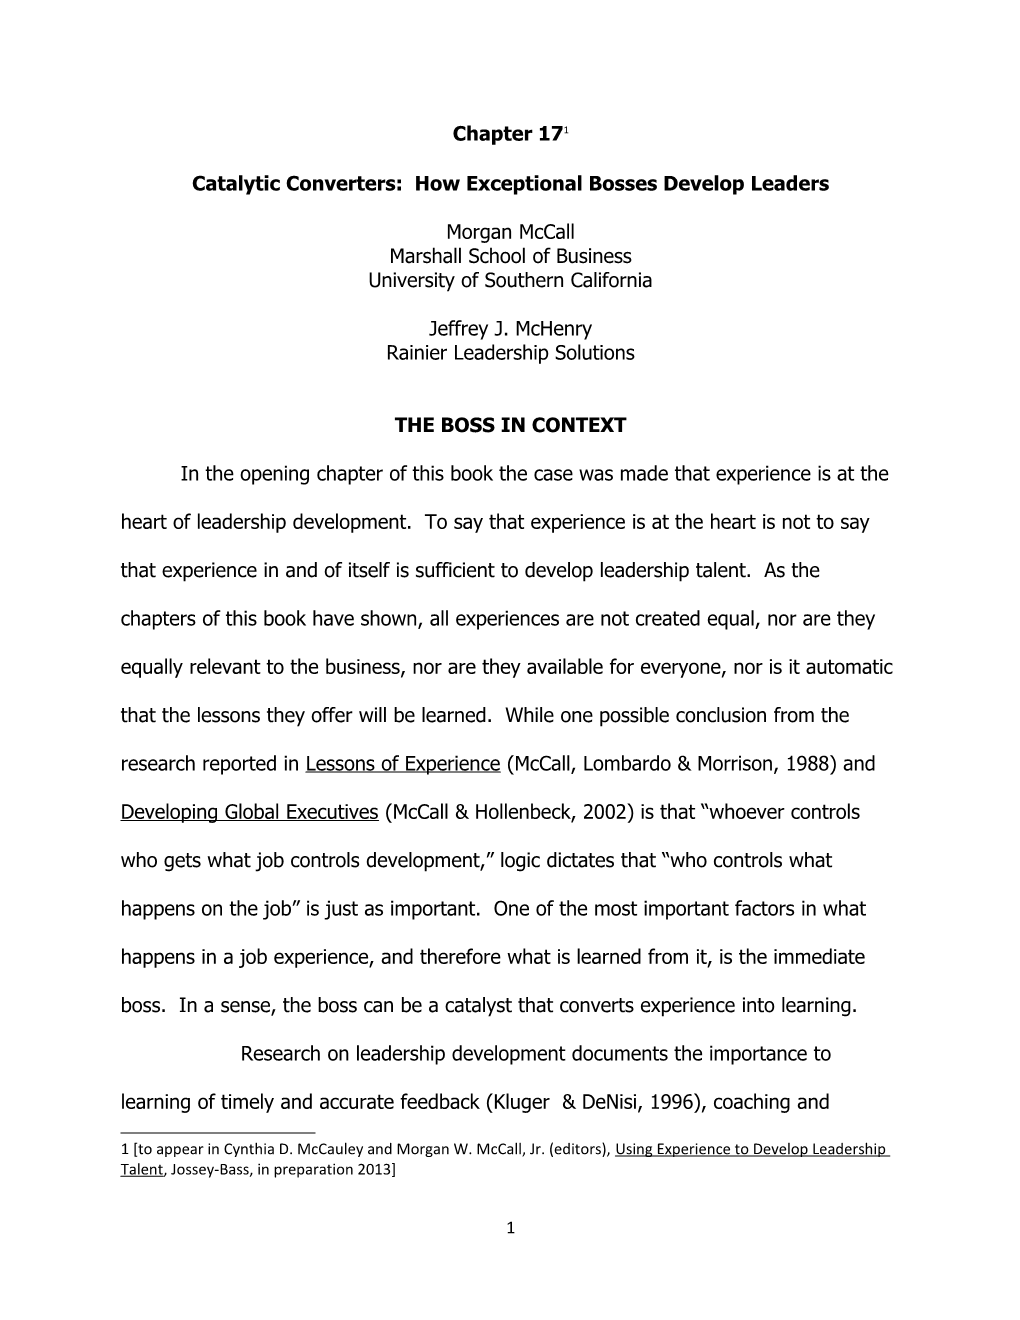 Catalytic Converters: How Exceptional Bossesdevelop Leaders